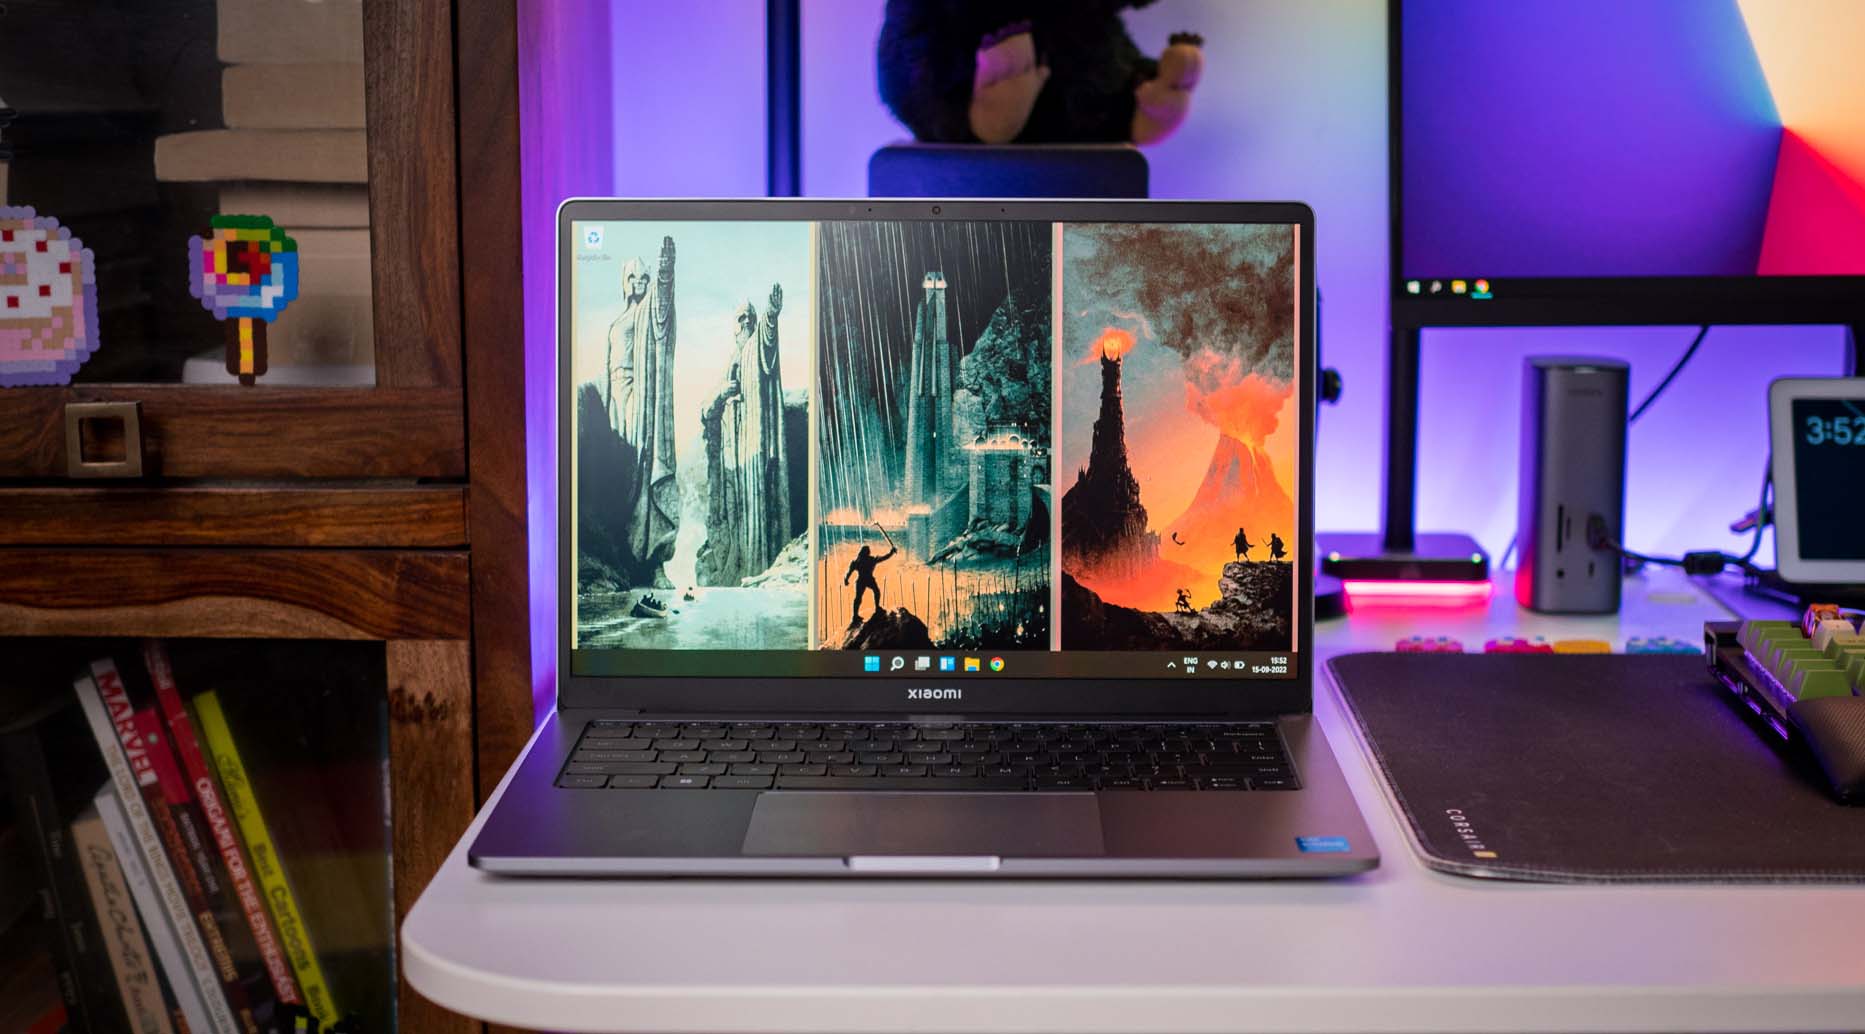 Xiaomi NoteBook Pro 120G, NoteBook Pro 120 launched in India